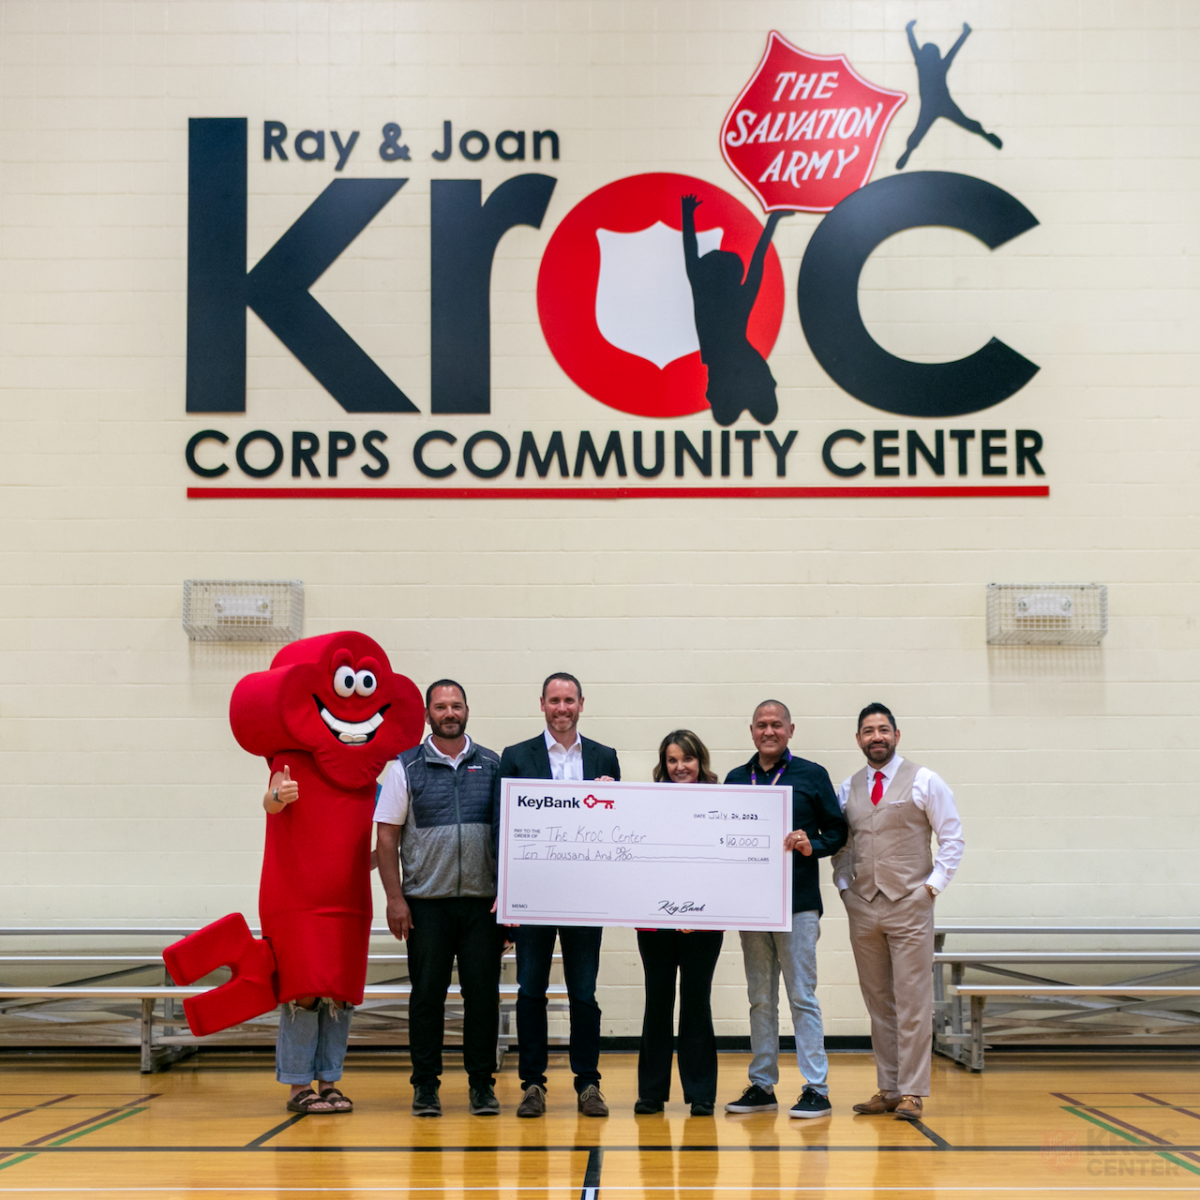 Kroc Corps Community Center team receiving a check from the KeyBank team.